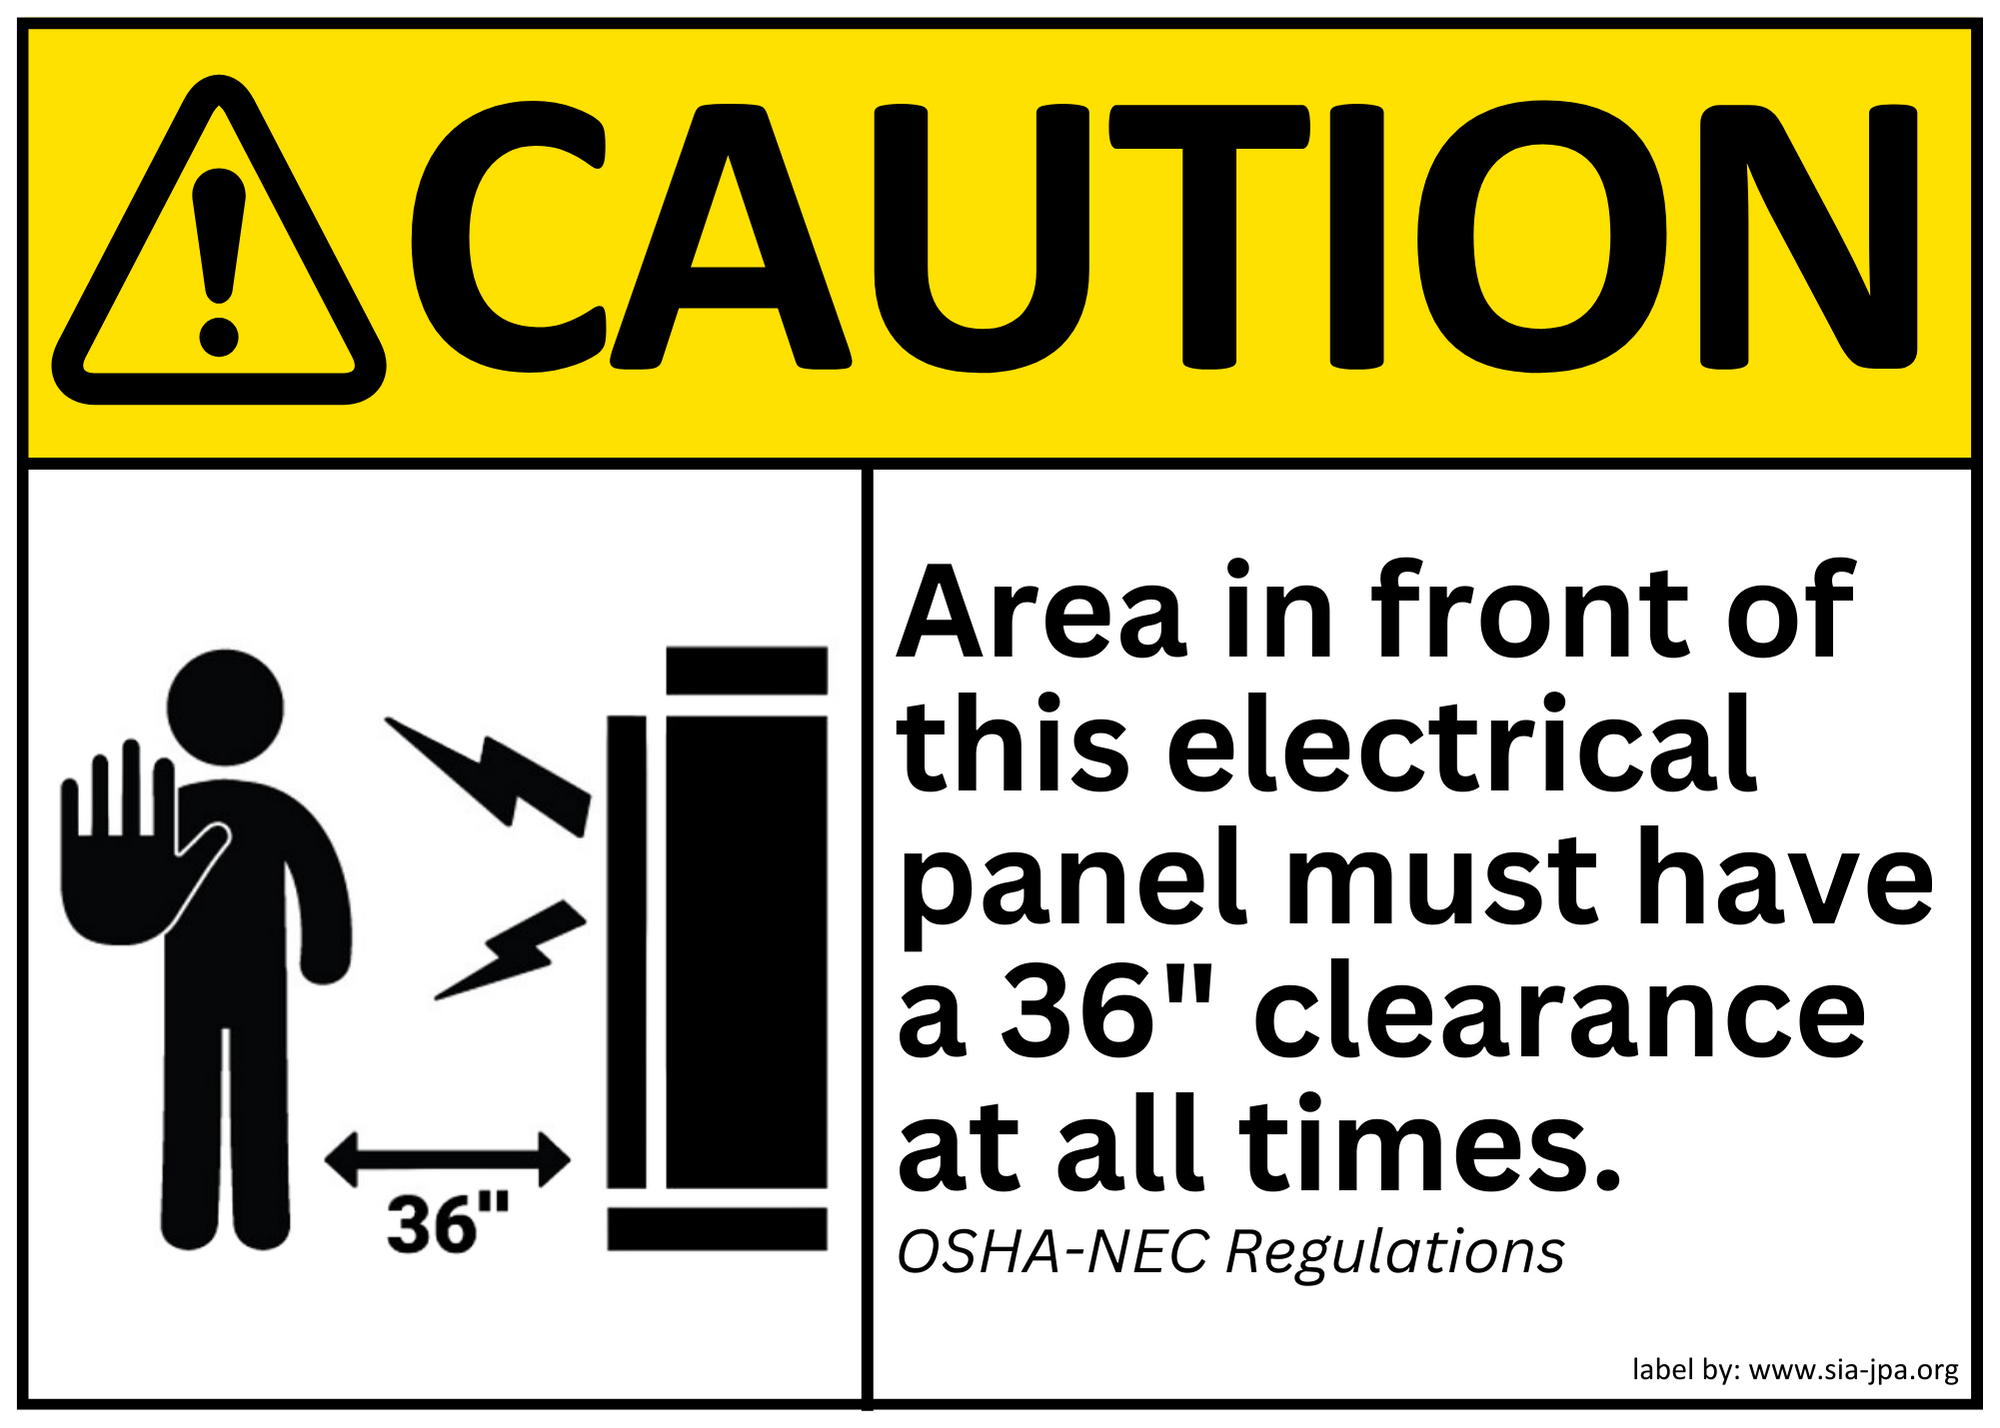 Caution - Electrical Panel text. Exclamation point in triangle graphic. Area in front of this electrical panel must have a 36